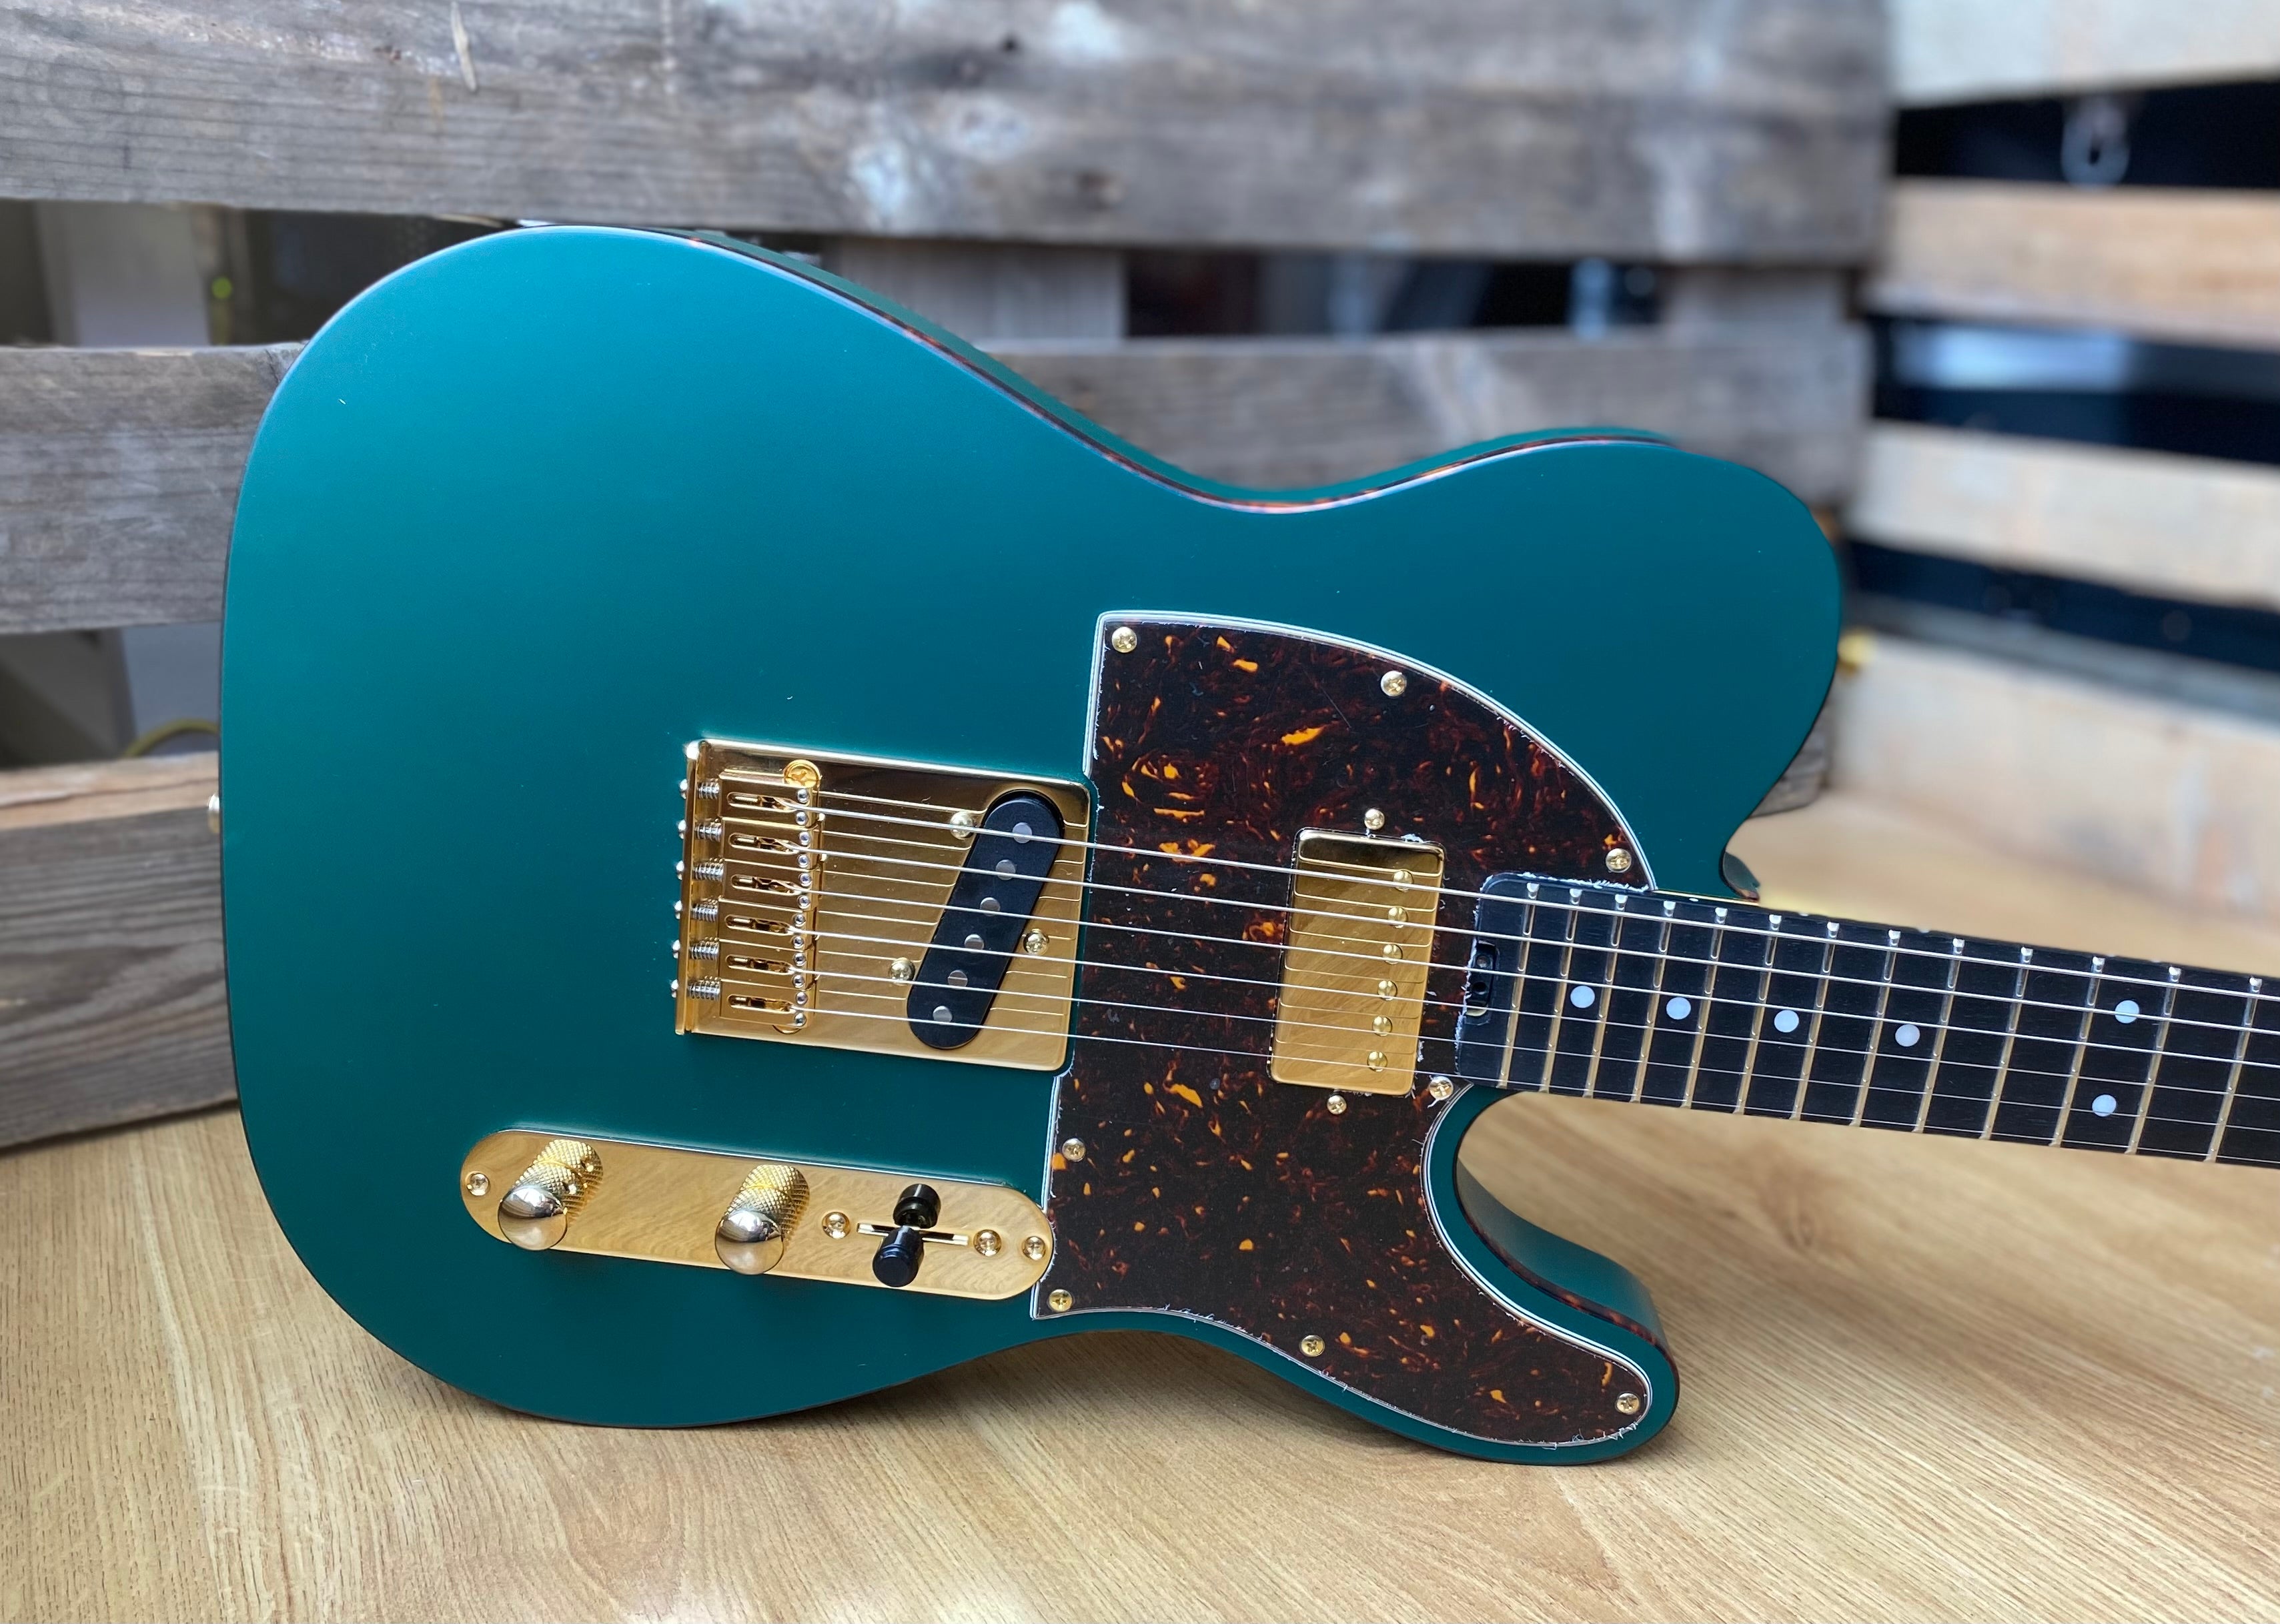 Gordon Smith Classic T HS "After 8" Custom, Electric Guitar for sale at Richards Guitars.